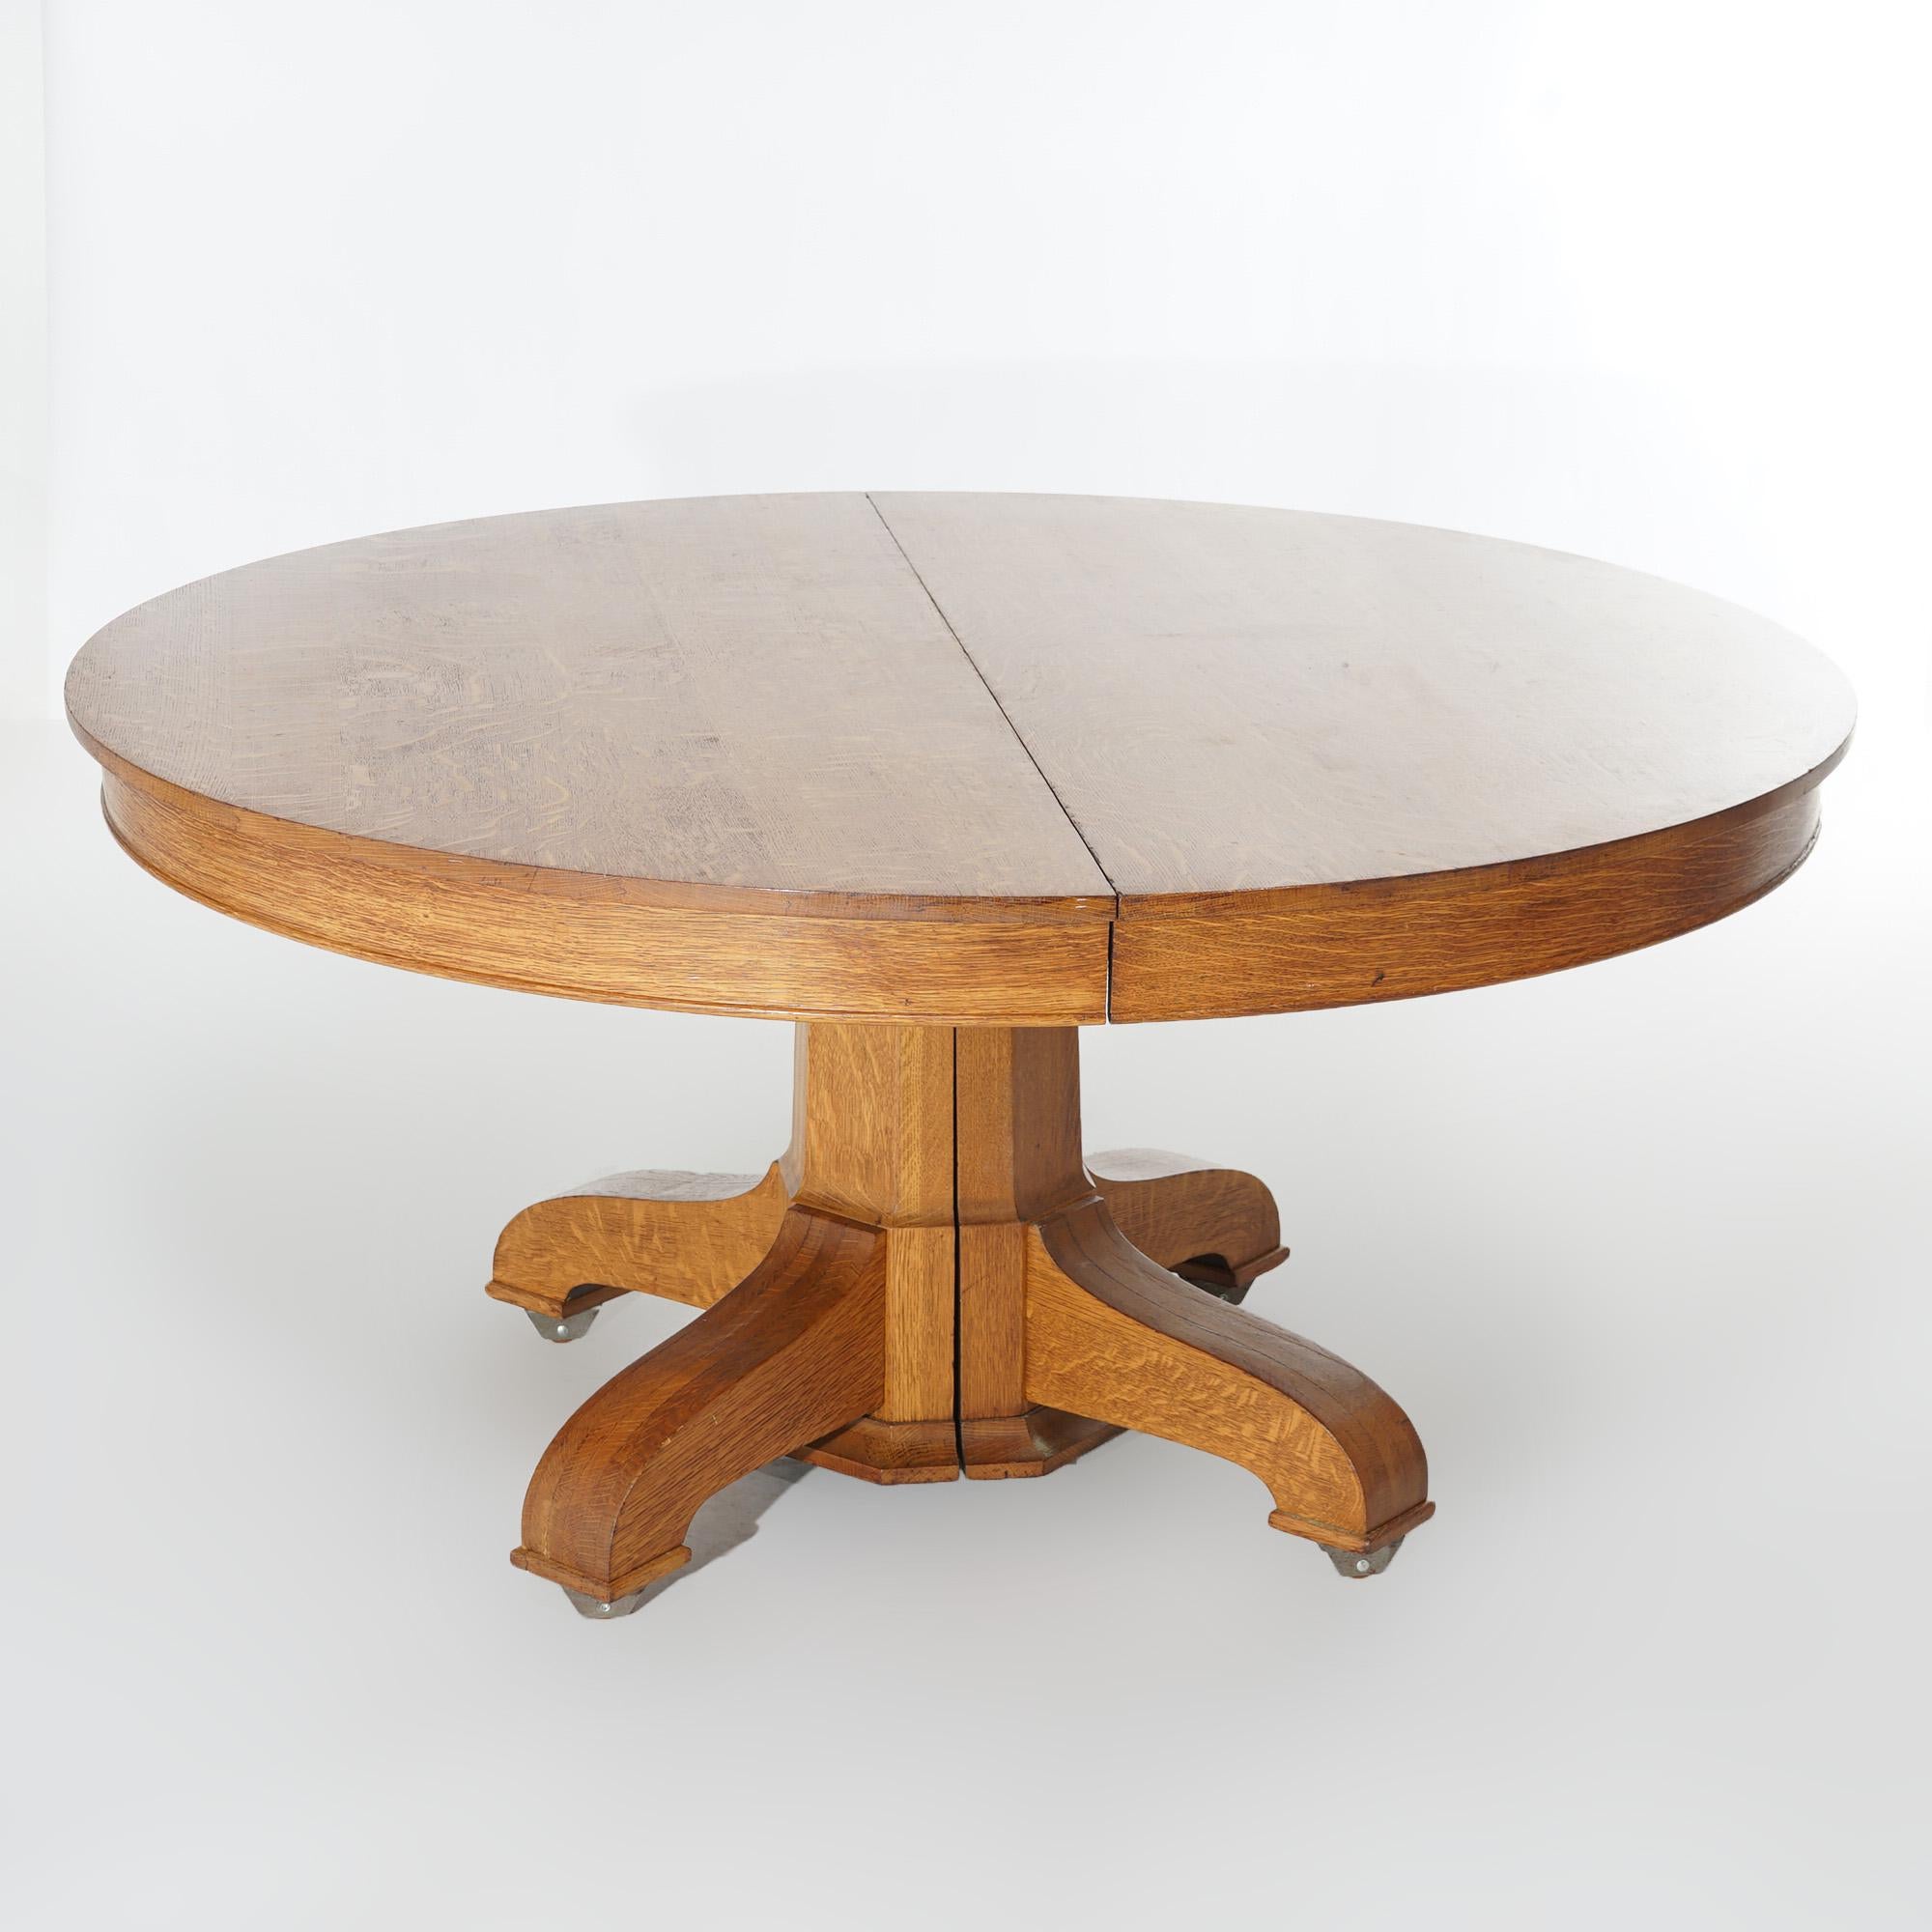 An antique Hastings Arts and Crafts Mission extension dining table offers quarter sawn oak construction with a round top over faceted pedestal raised on four legs, accepts four leaves, c1920

Measures - 60